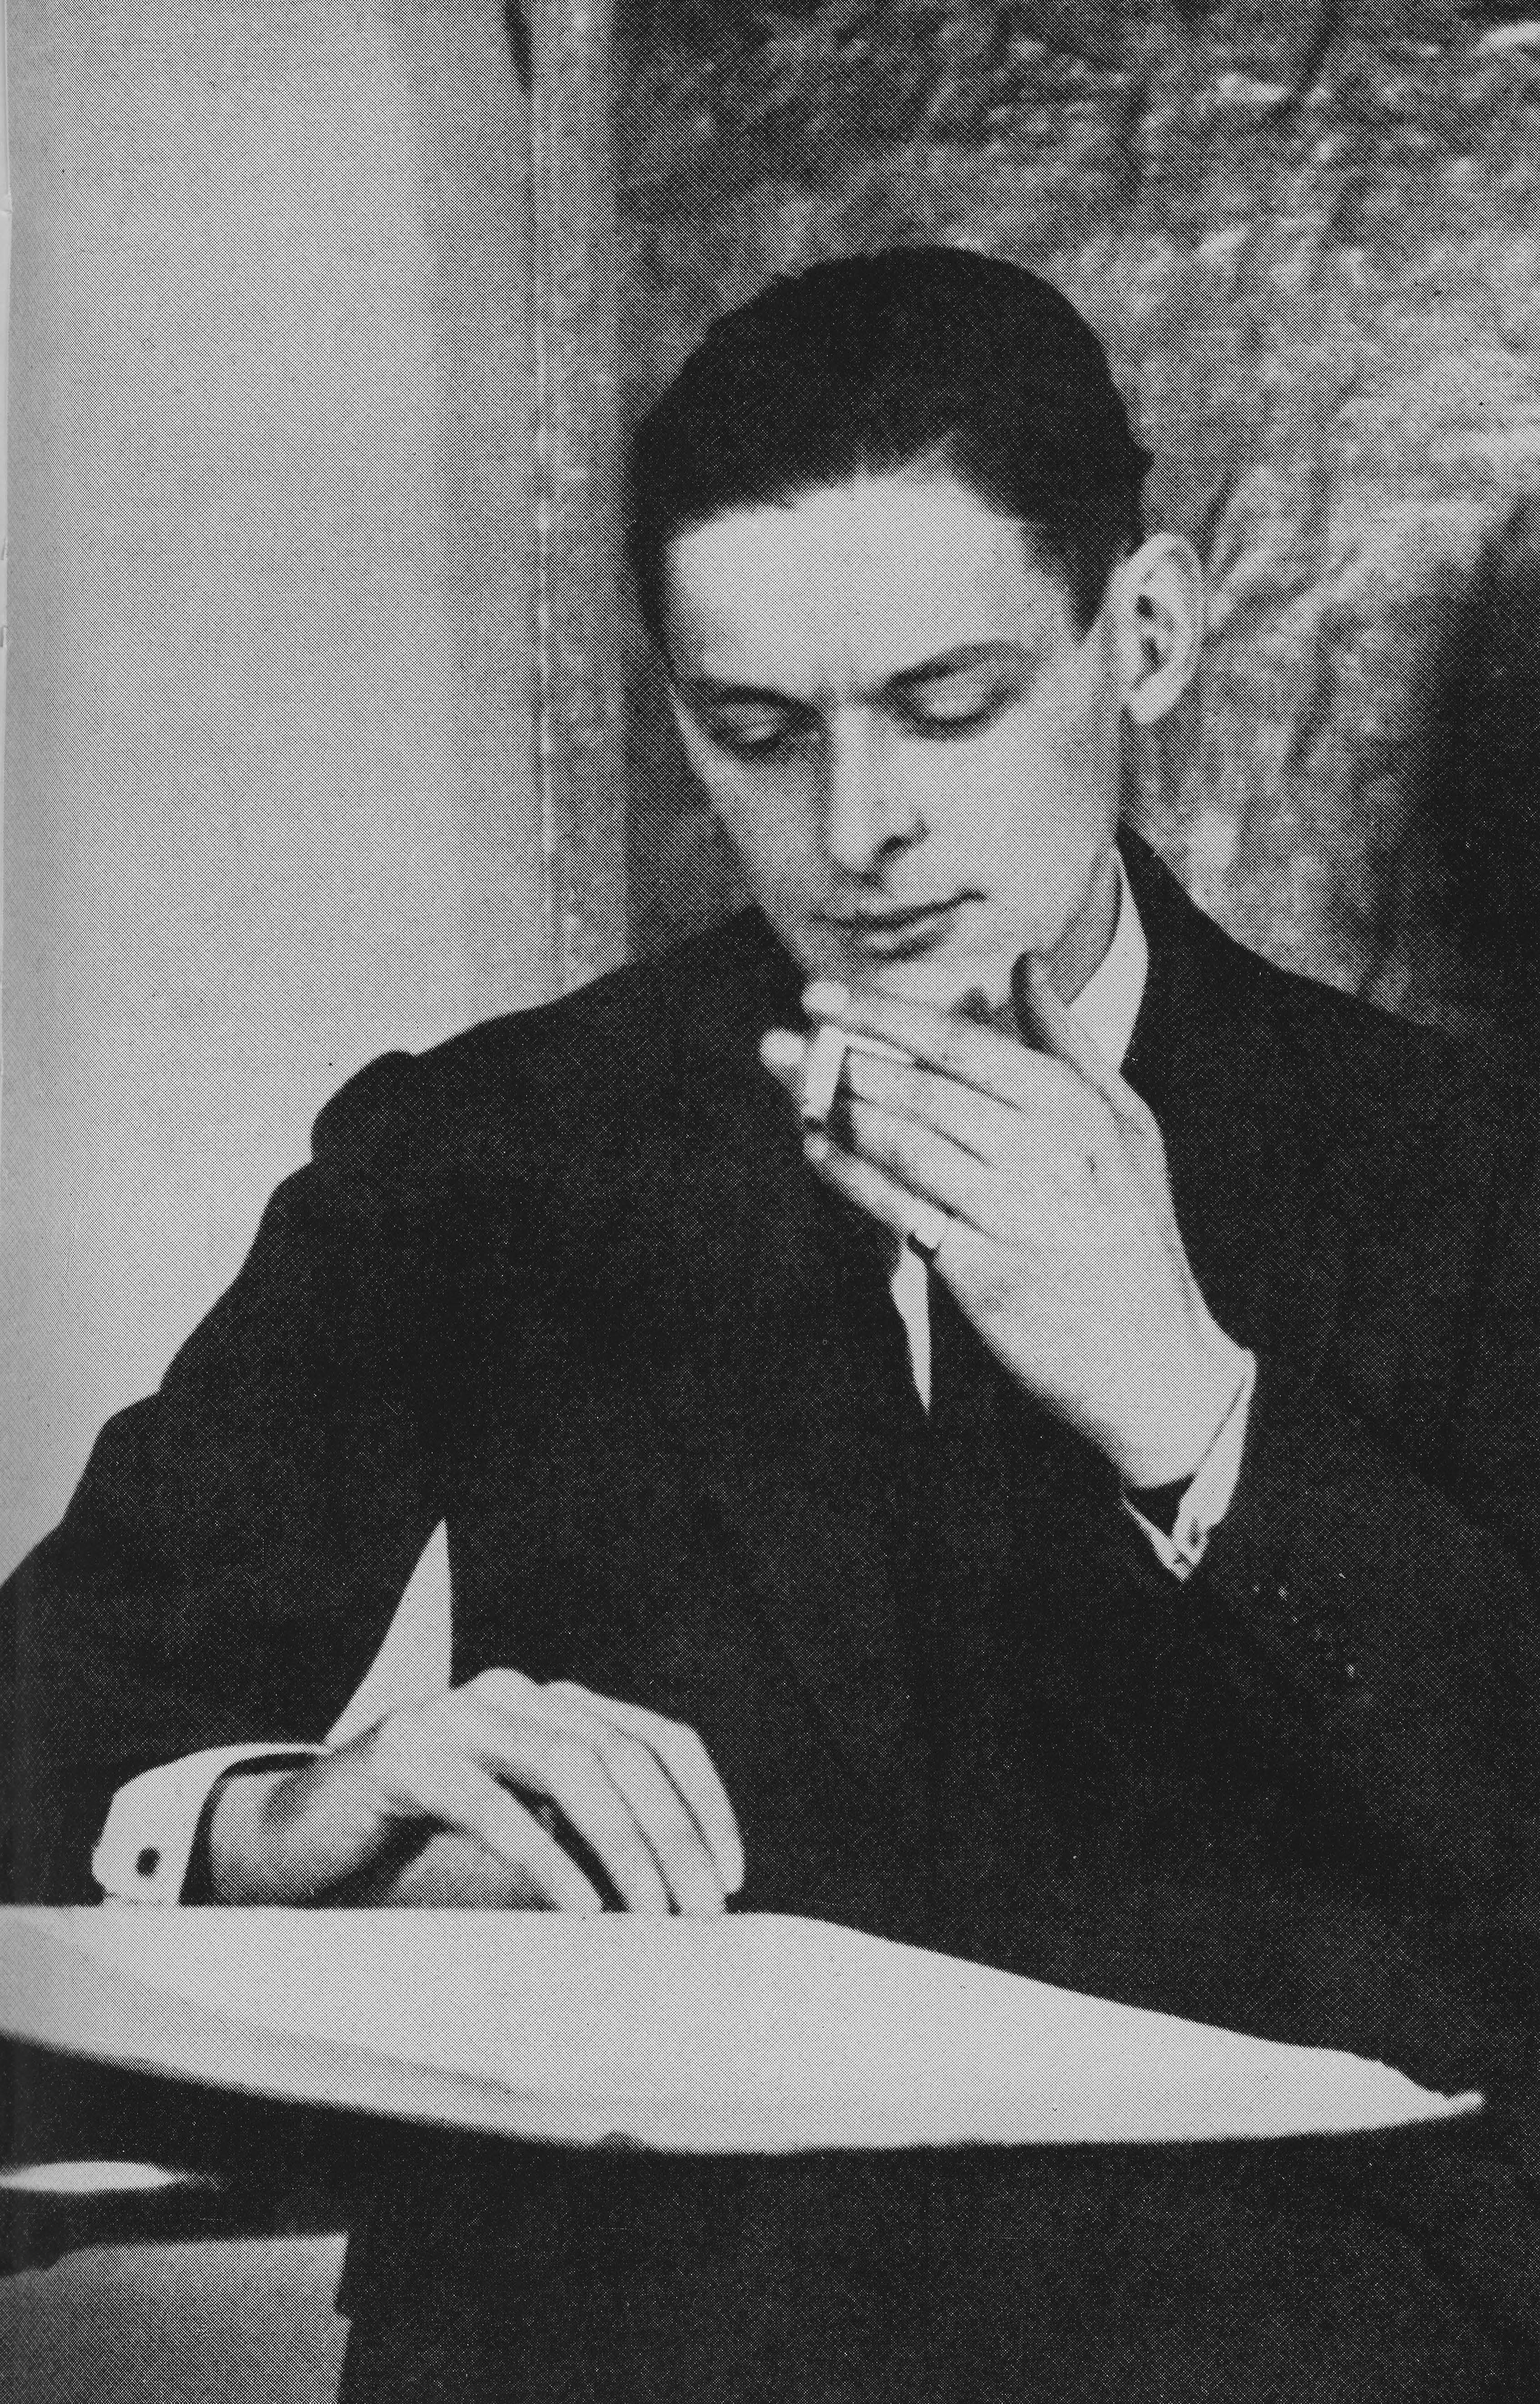 20. Eliot in London, age 29 or 30 (ca. 1918)